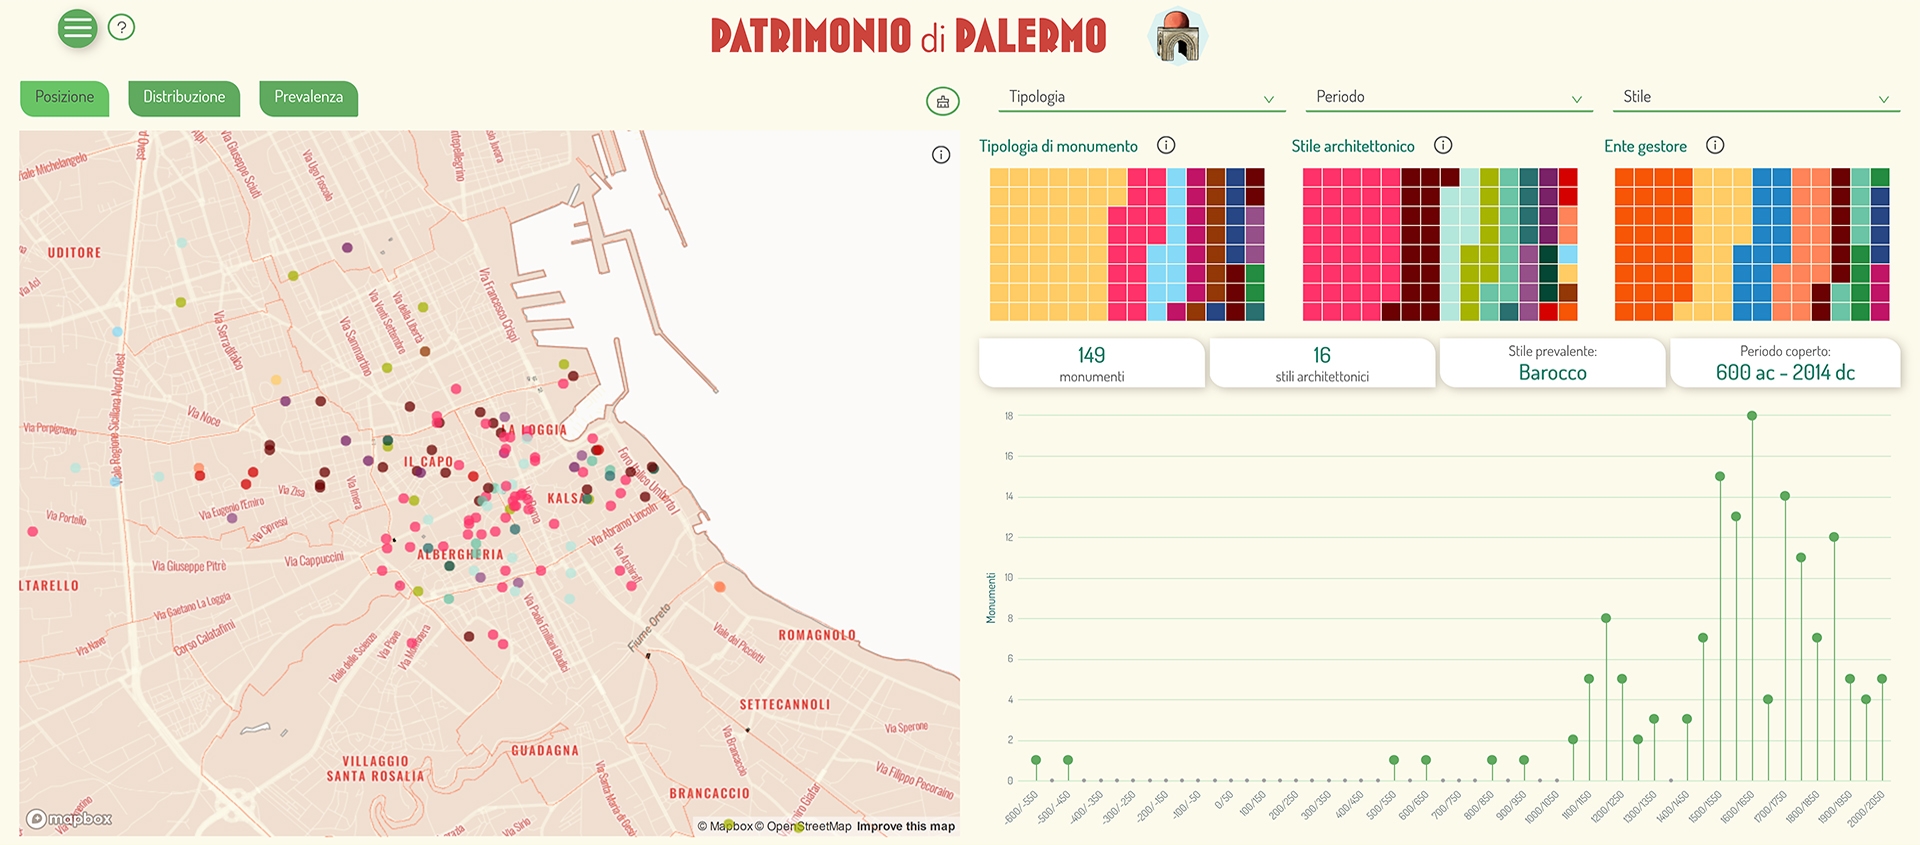 dashboard with scattermap, waffle and lollipop